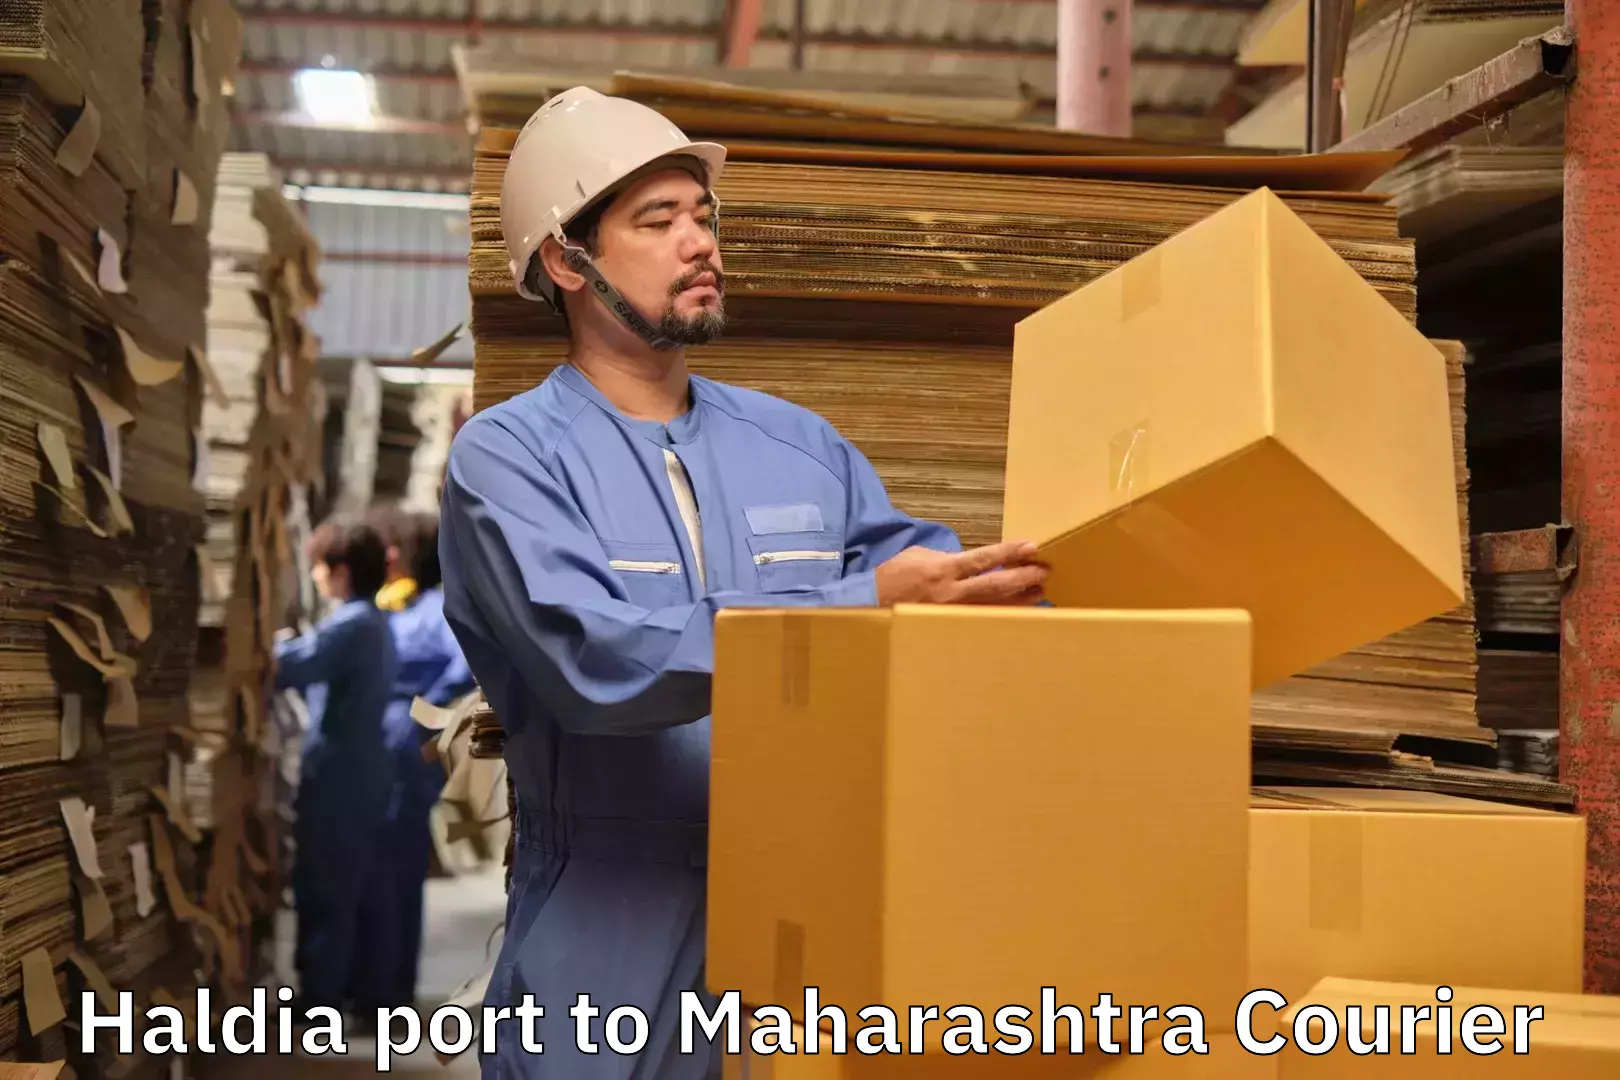 Hassle-free luggage shipping in Haldia port to Alephata